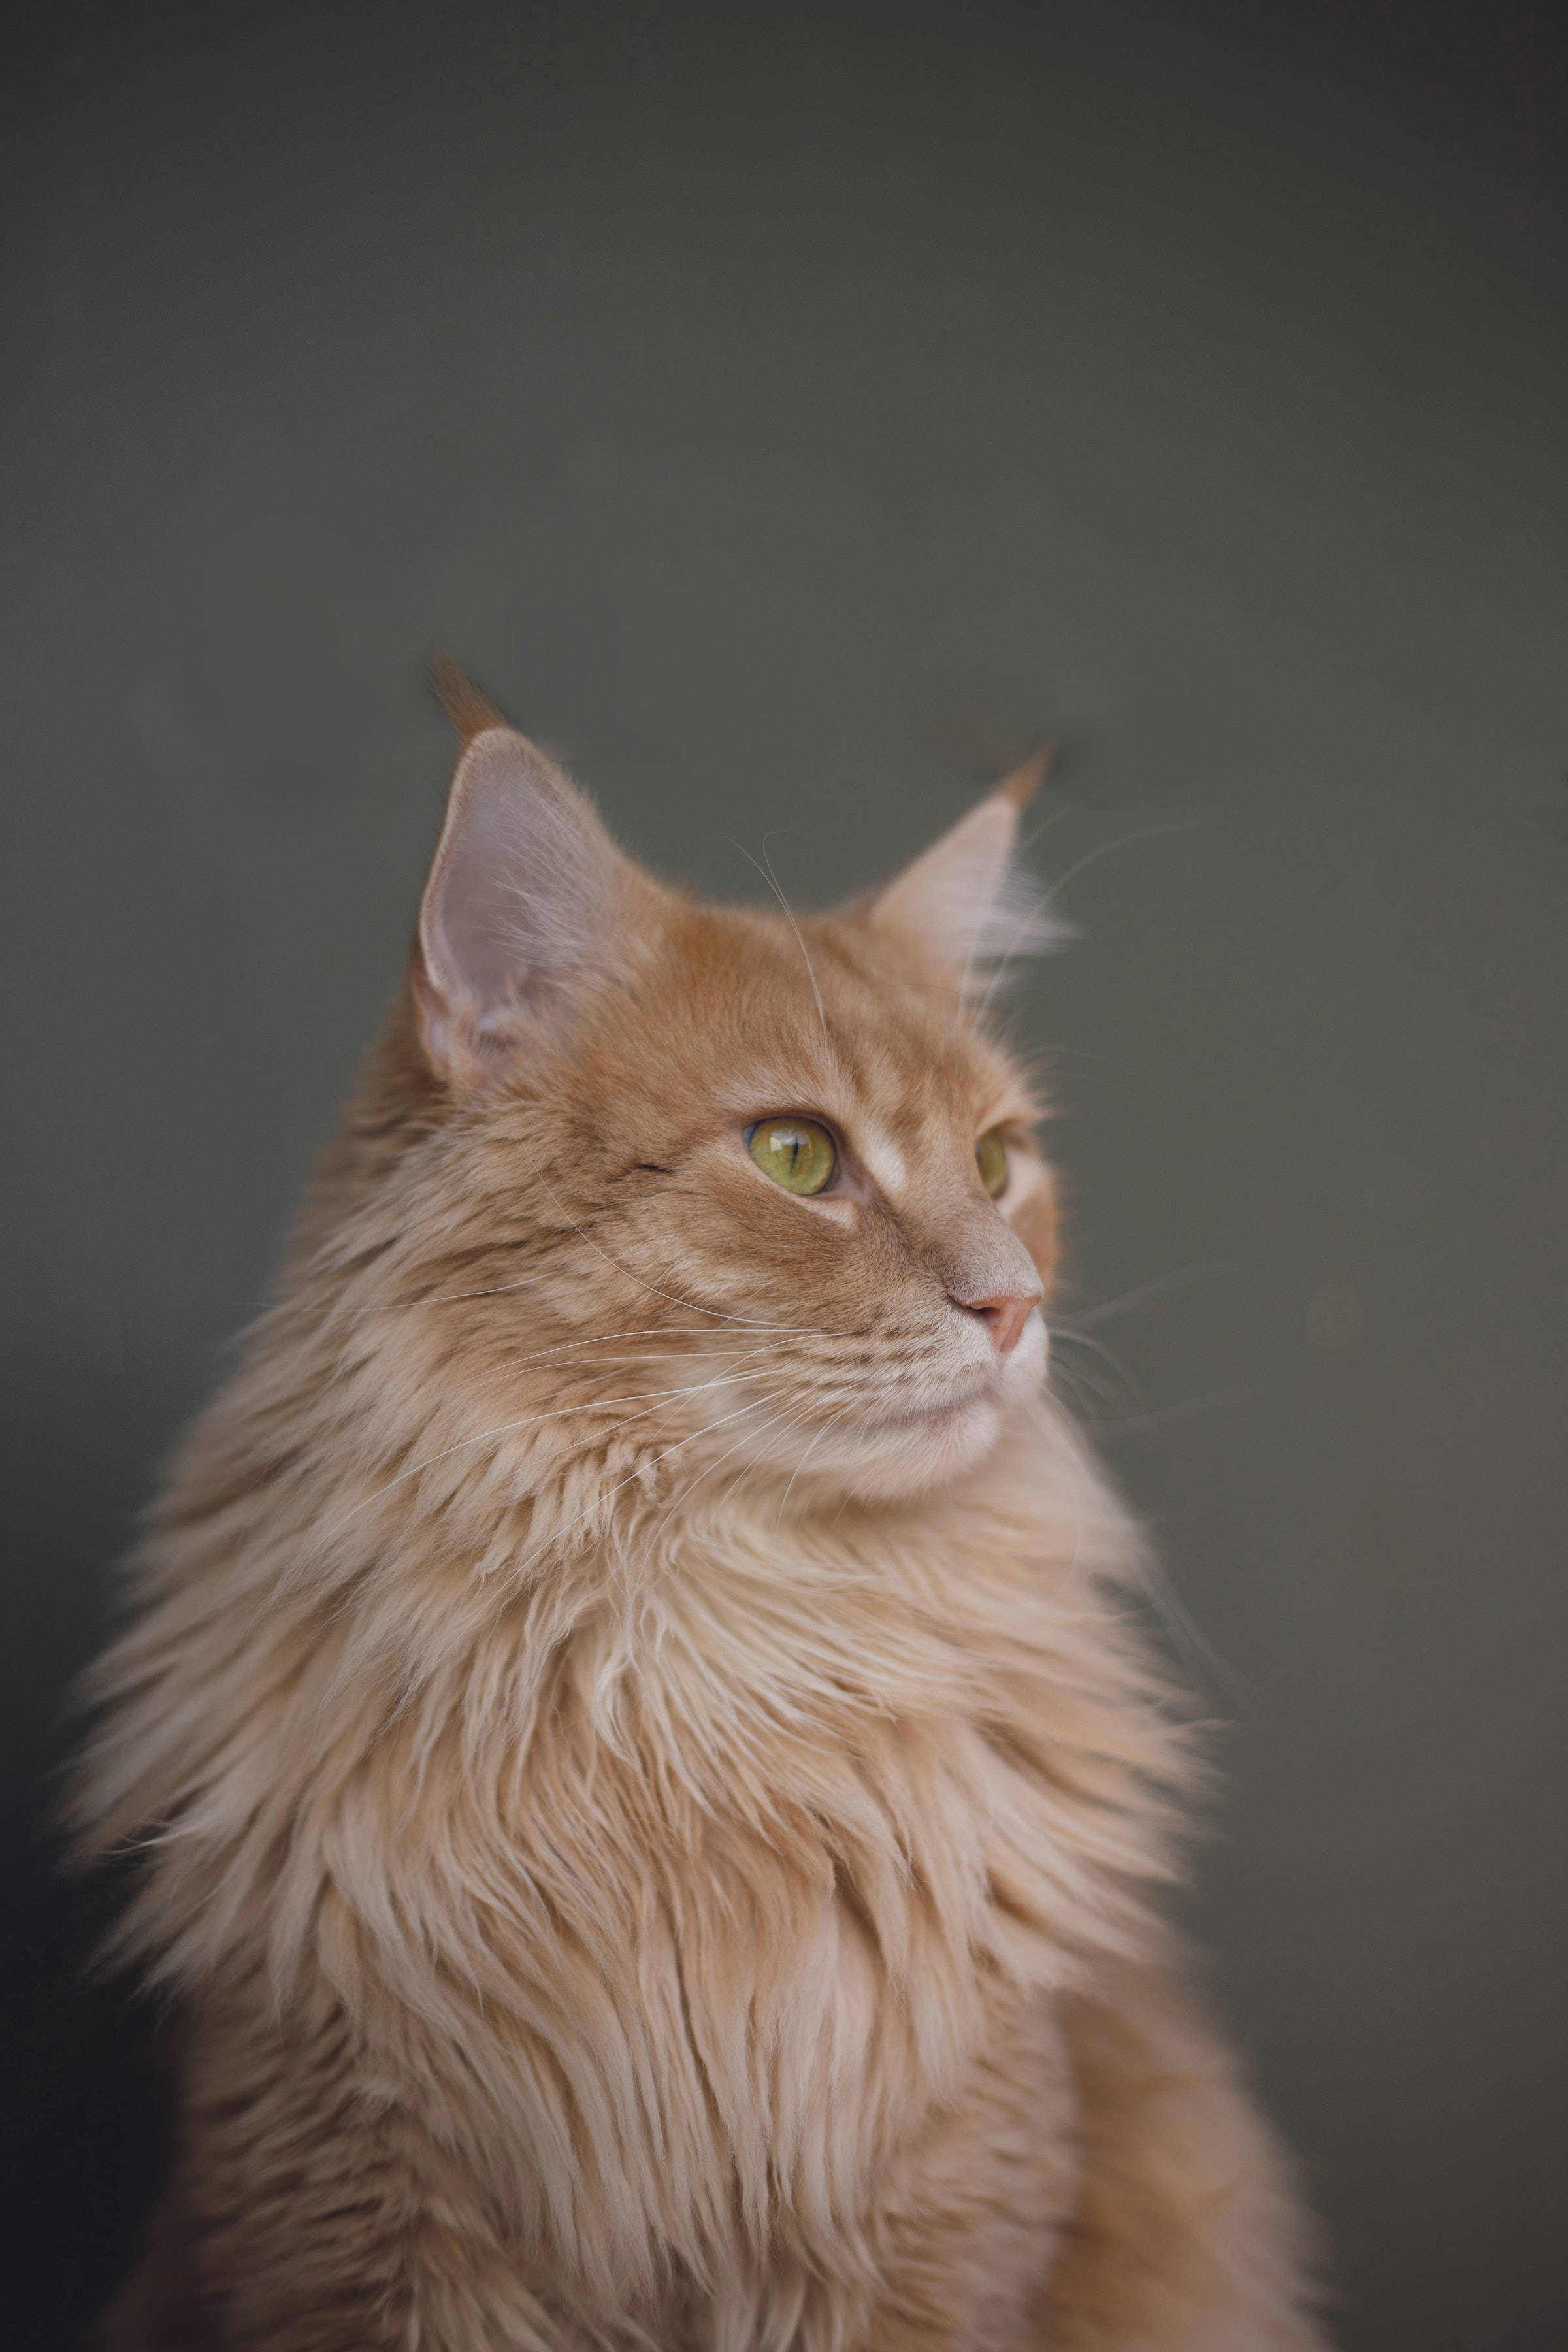 Majestic Maine Coon in Aesthetic Pose Wallpaper